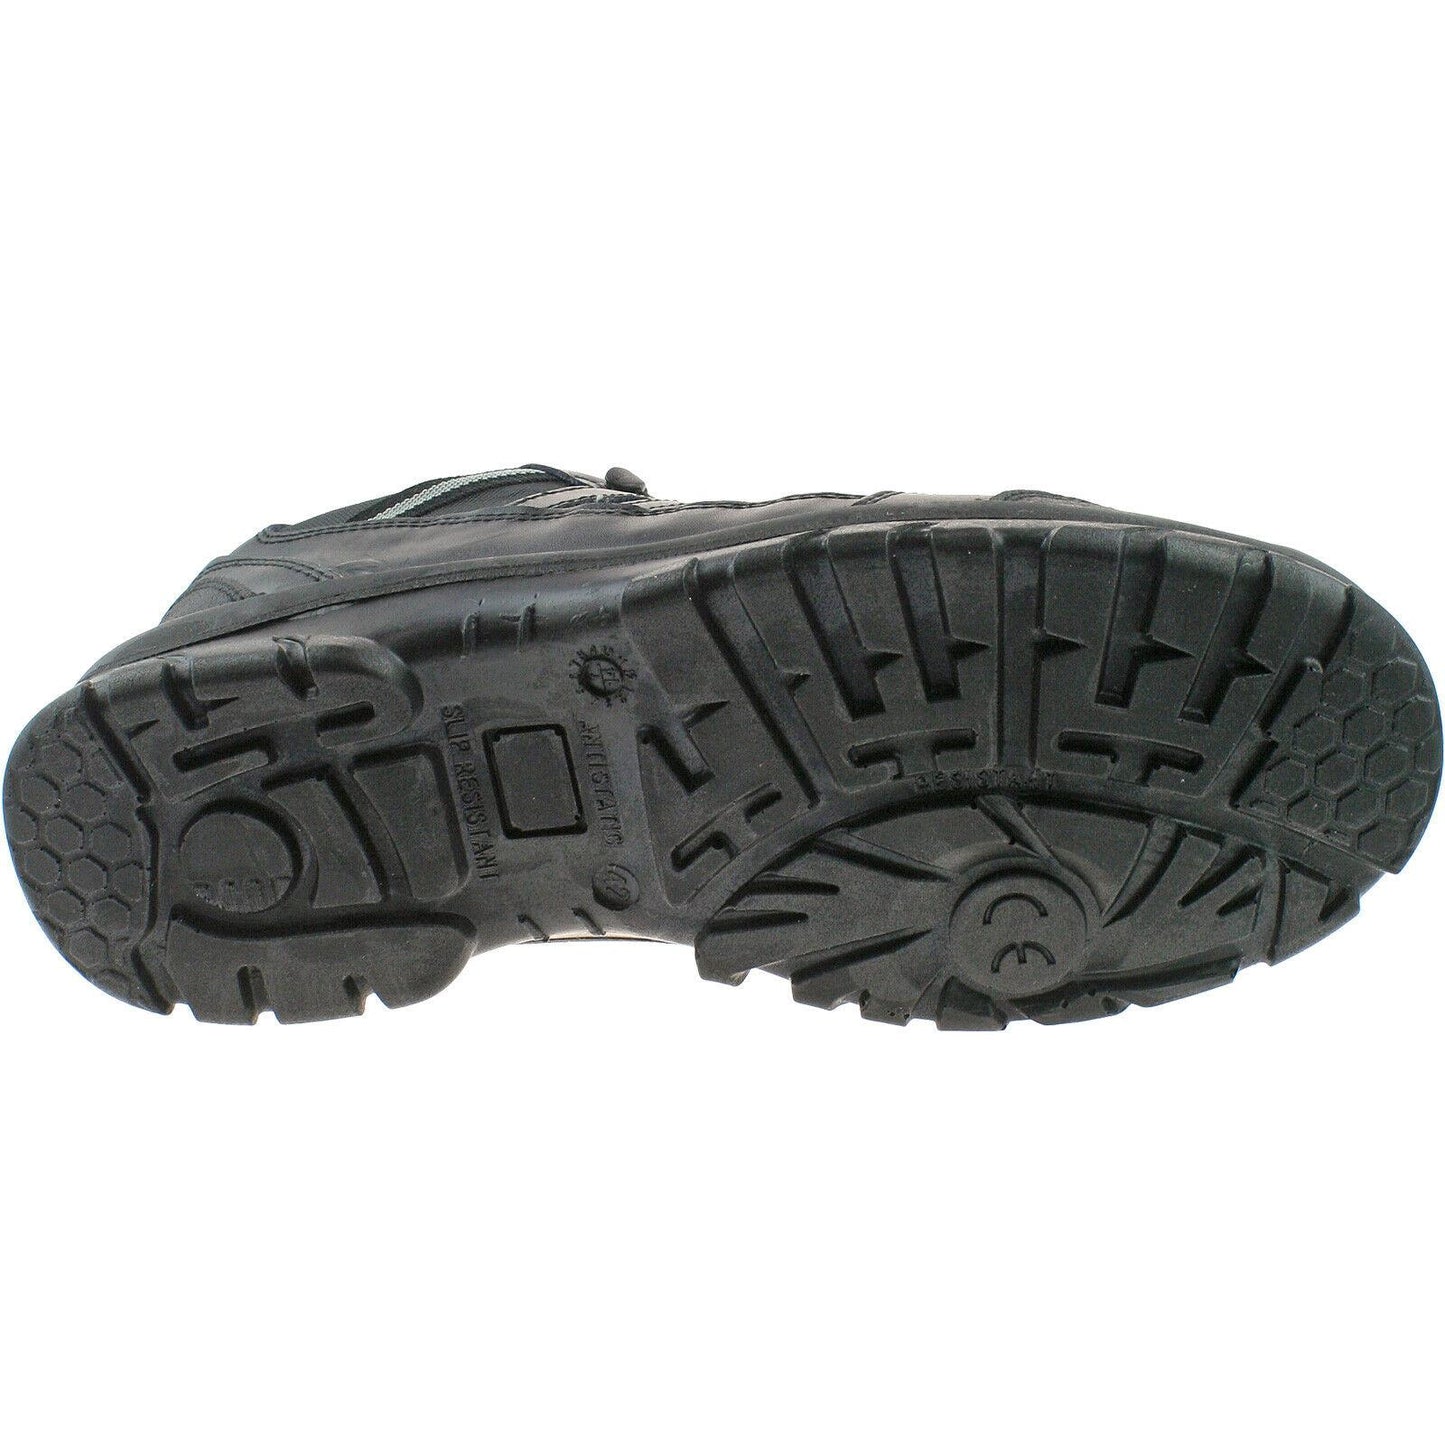 Grafters Non-metal Safety Toe Trainers Work Black M462A